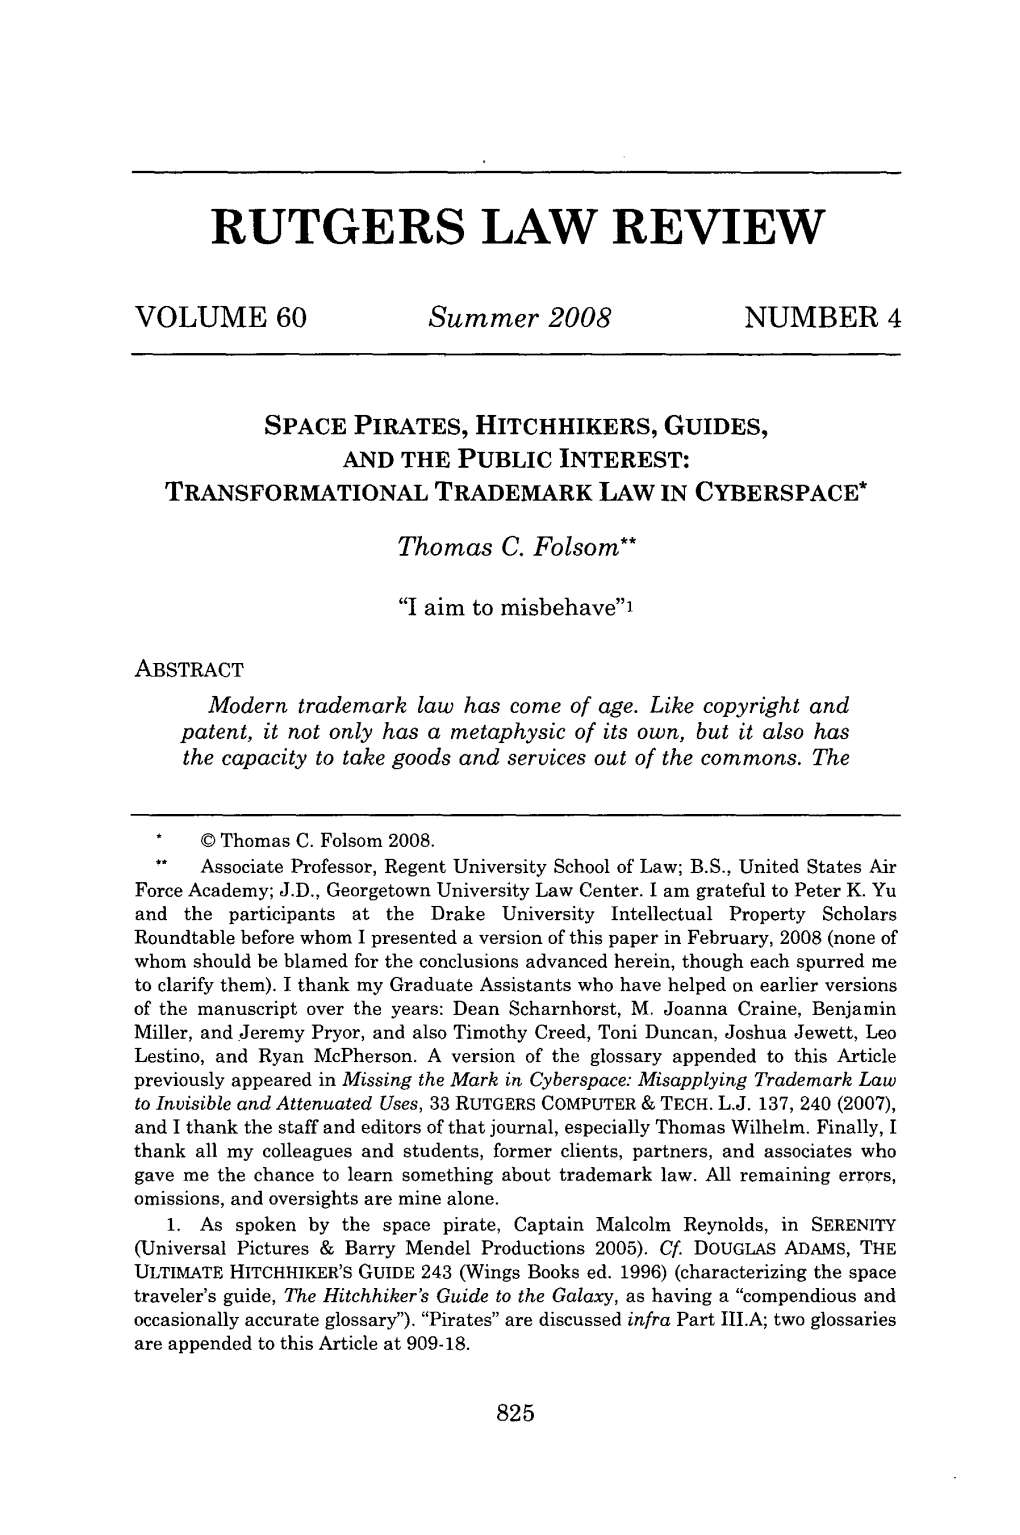 Transformational Trademark Law in Cyberspace*